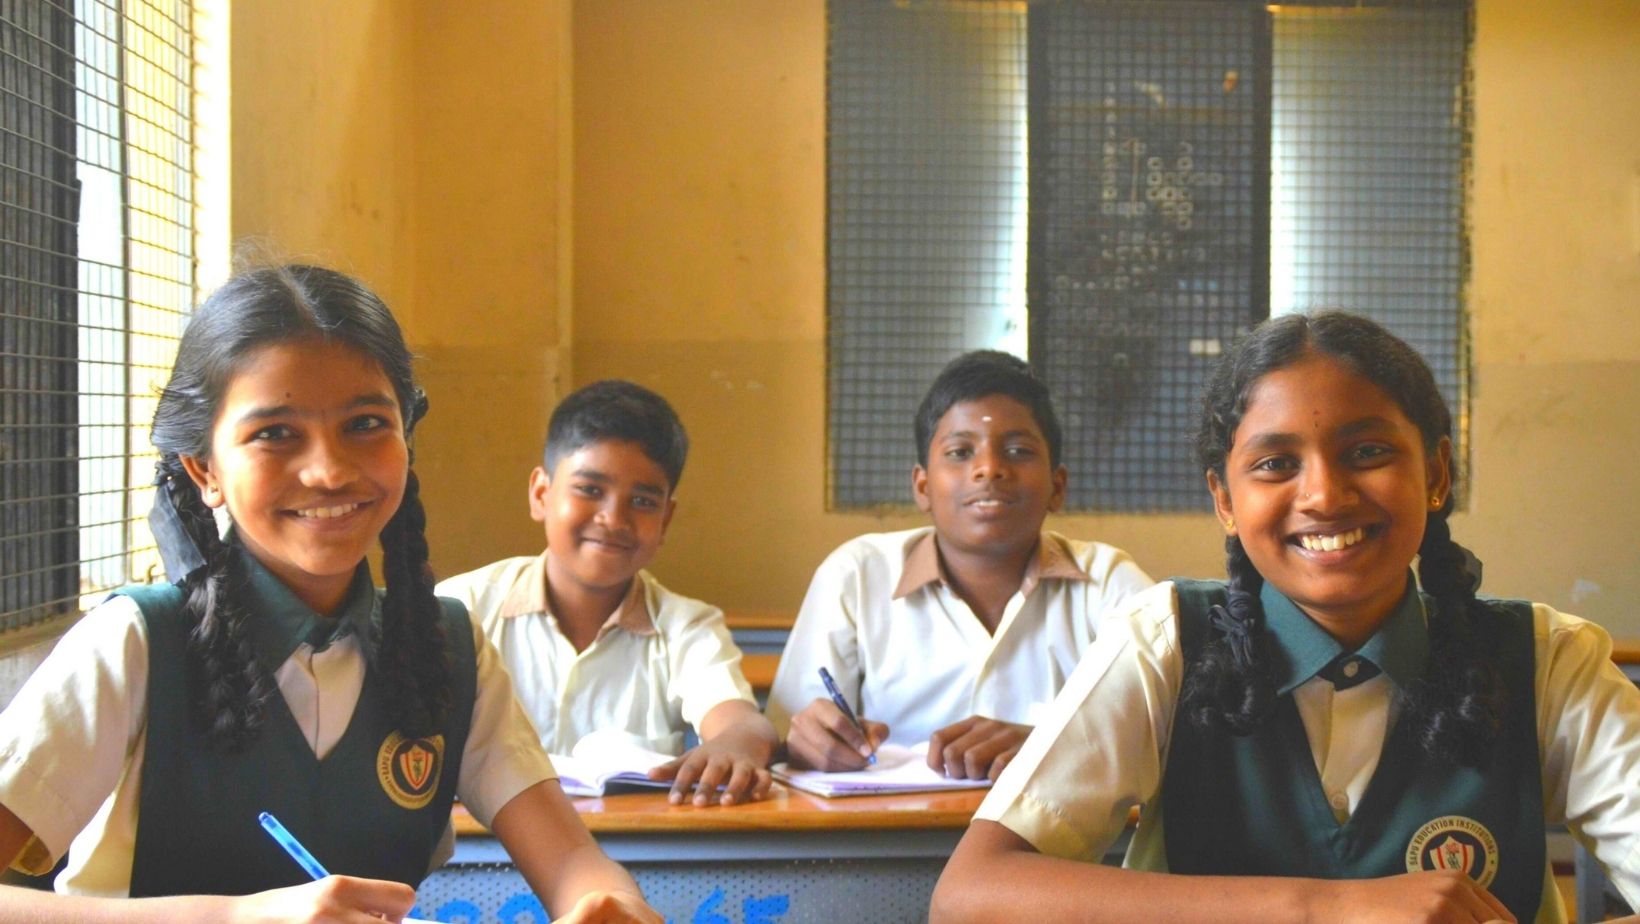 This Diwali, Gift a Dream to 30 Kids & Help Them Finish School With Just a Click